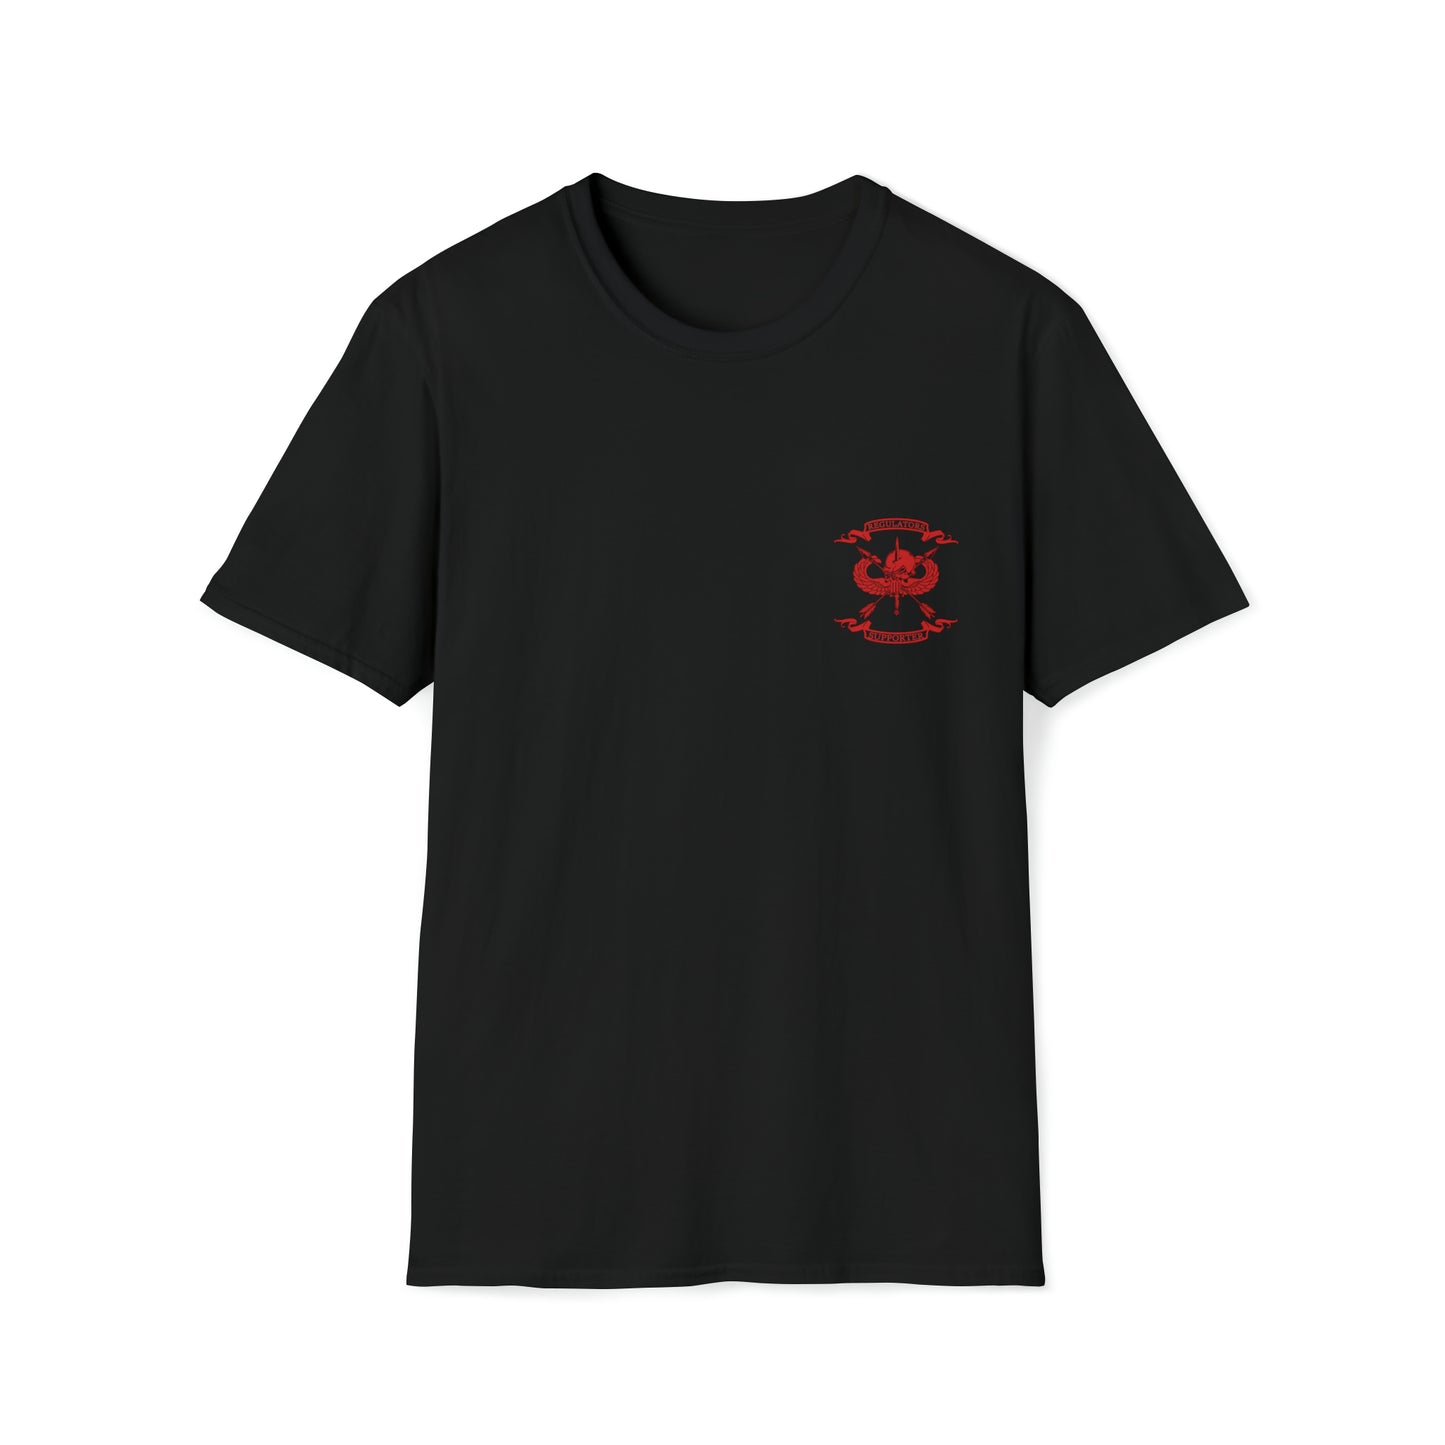 Ladies Supporter Softstyle Black/Red